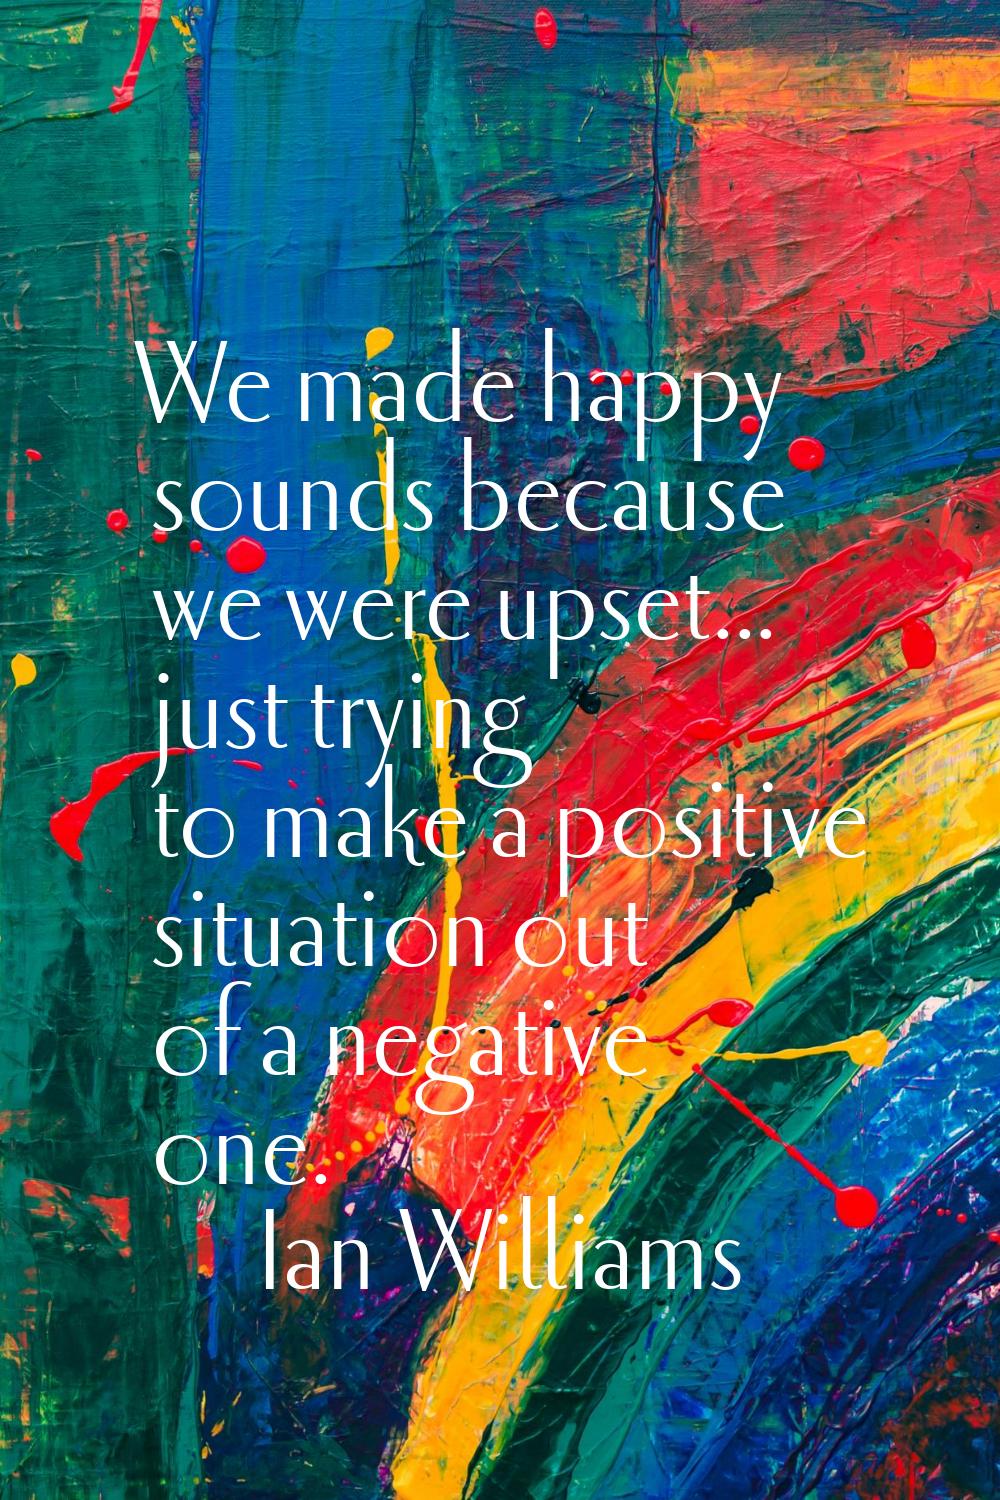 We made happy sounds because we were upset... just trying to make a positive situation out of a neg